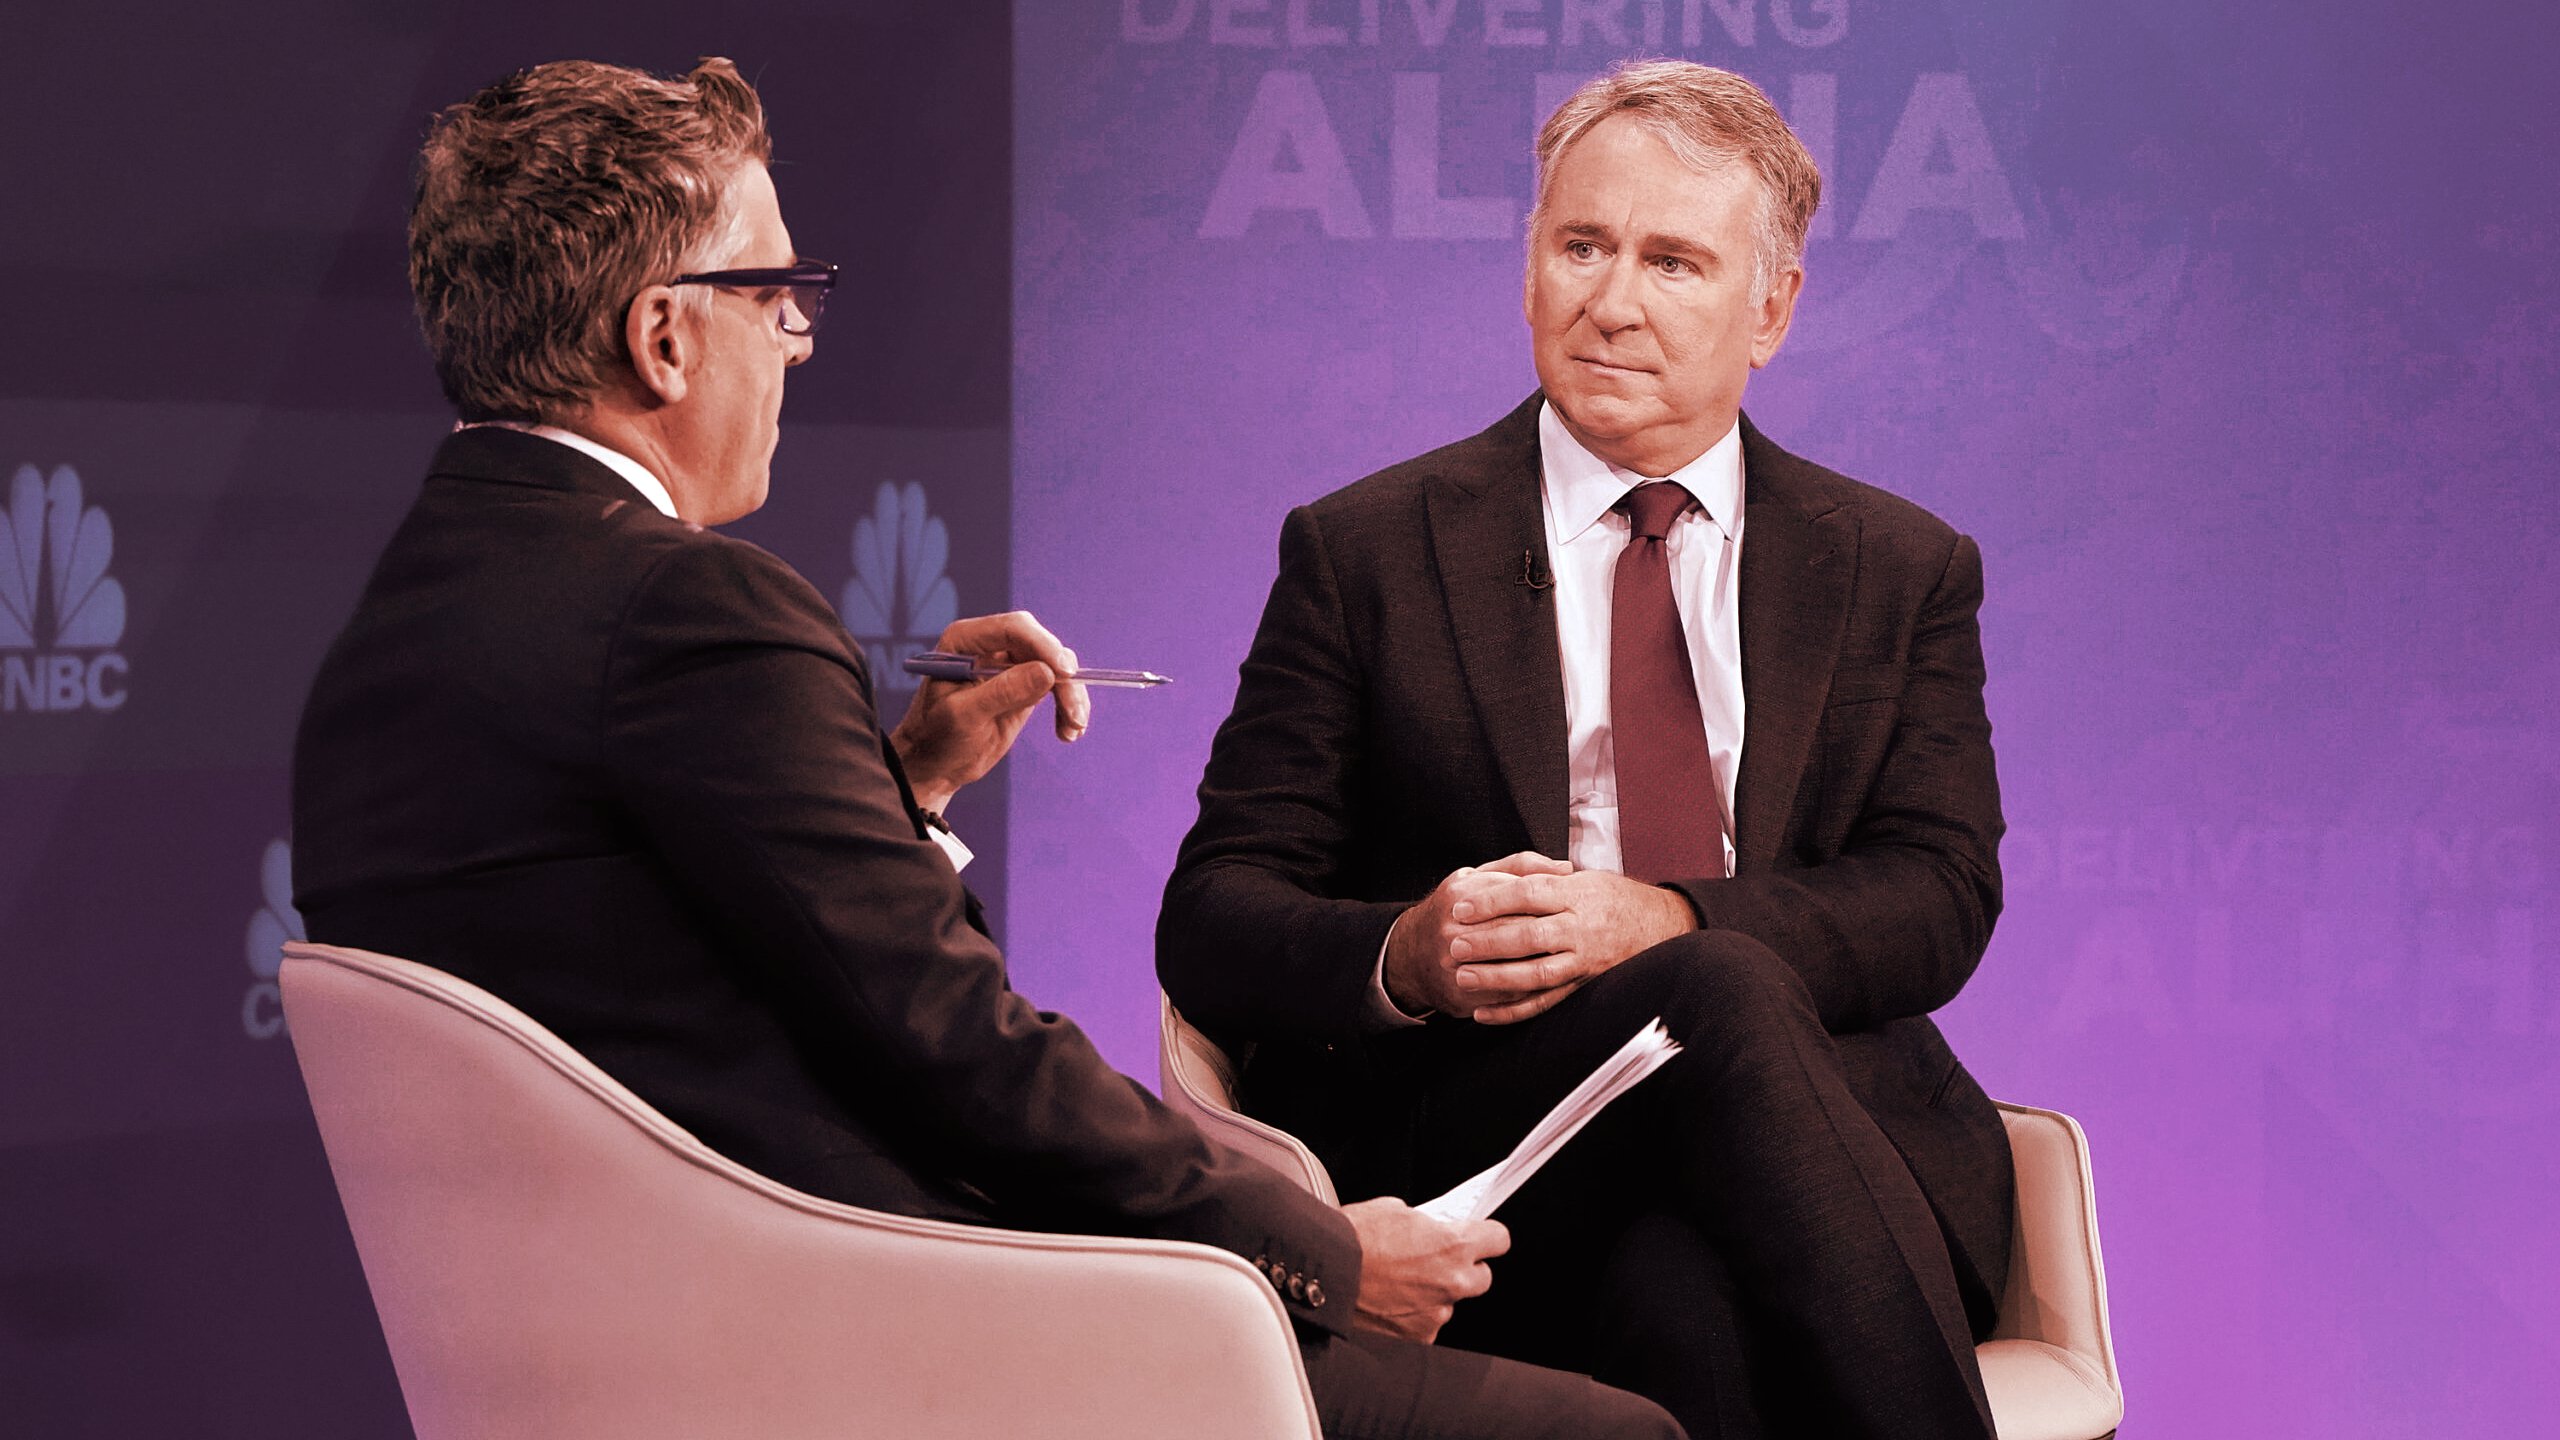 Citadel's Ken Griffin: Investors Leaving Bitcoin, NFTs and Meme Stocks Is Good for Economy